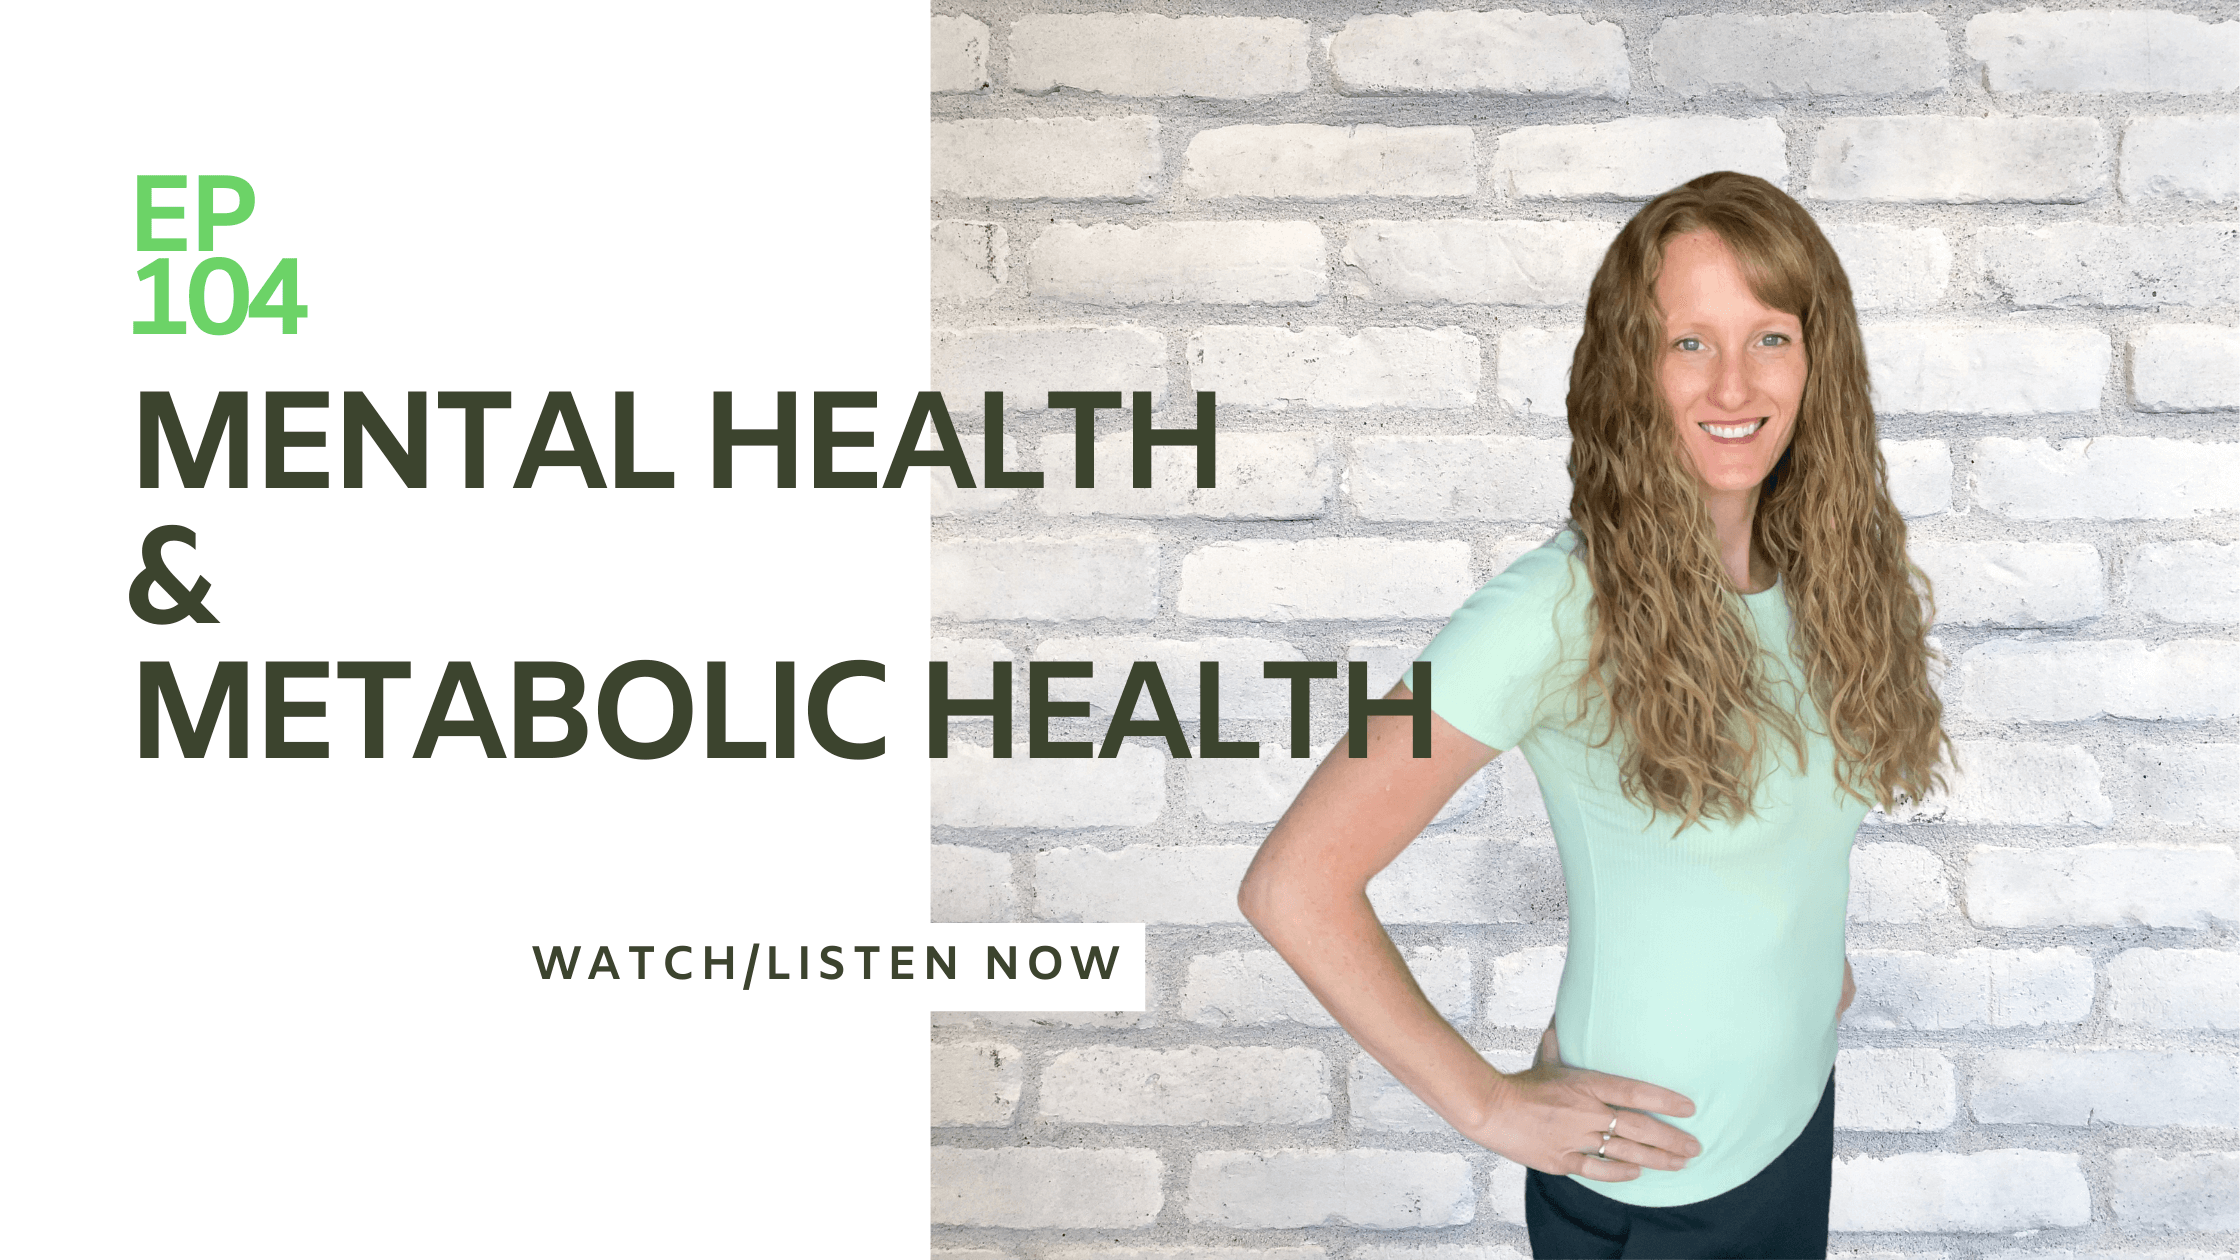 Holistic Health Bites podcast by Functional Nutritionist Andrea Nicholson featuring Dr Christina Bjorndal discussing mental and metabolic health